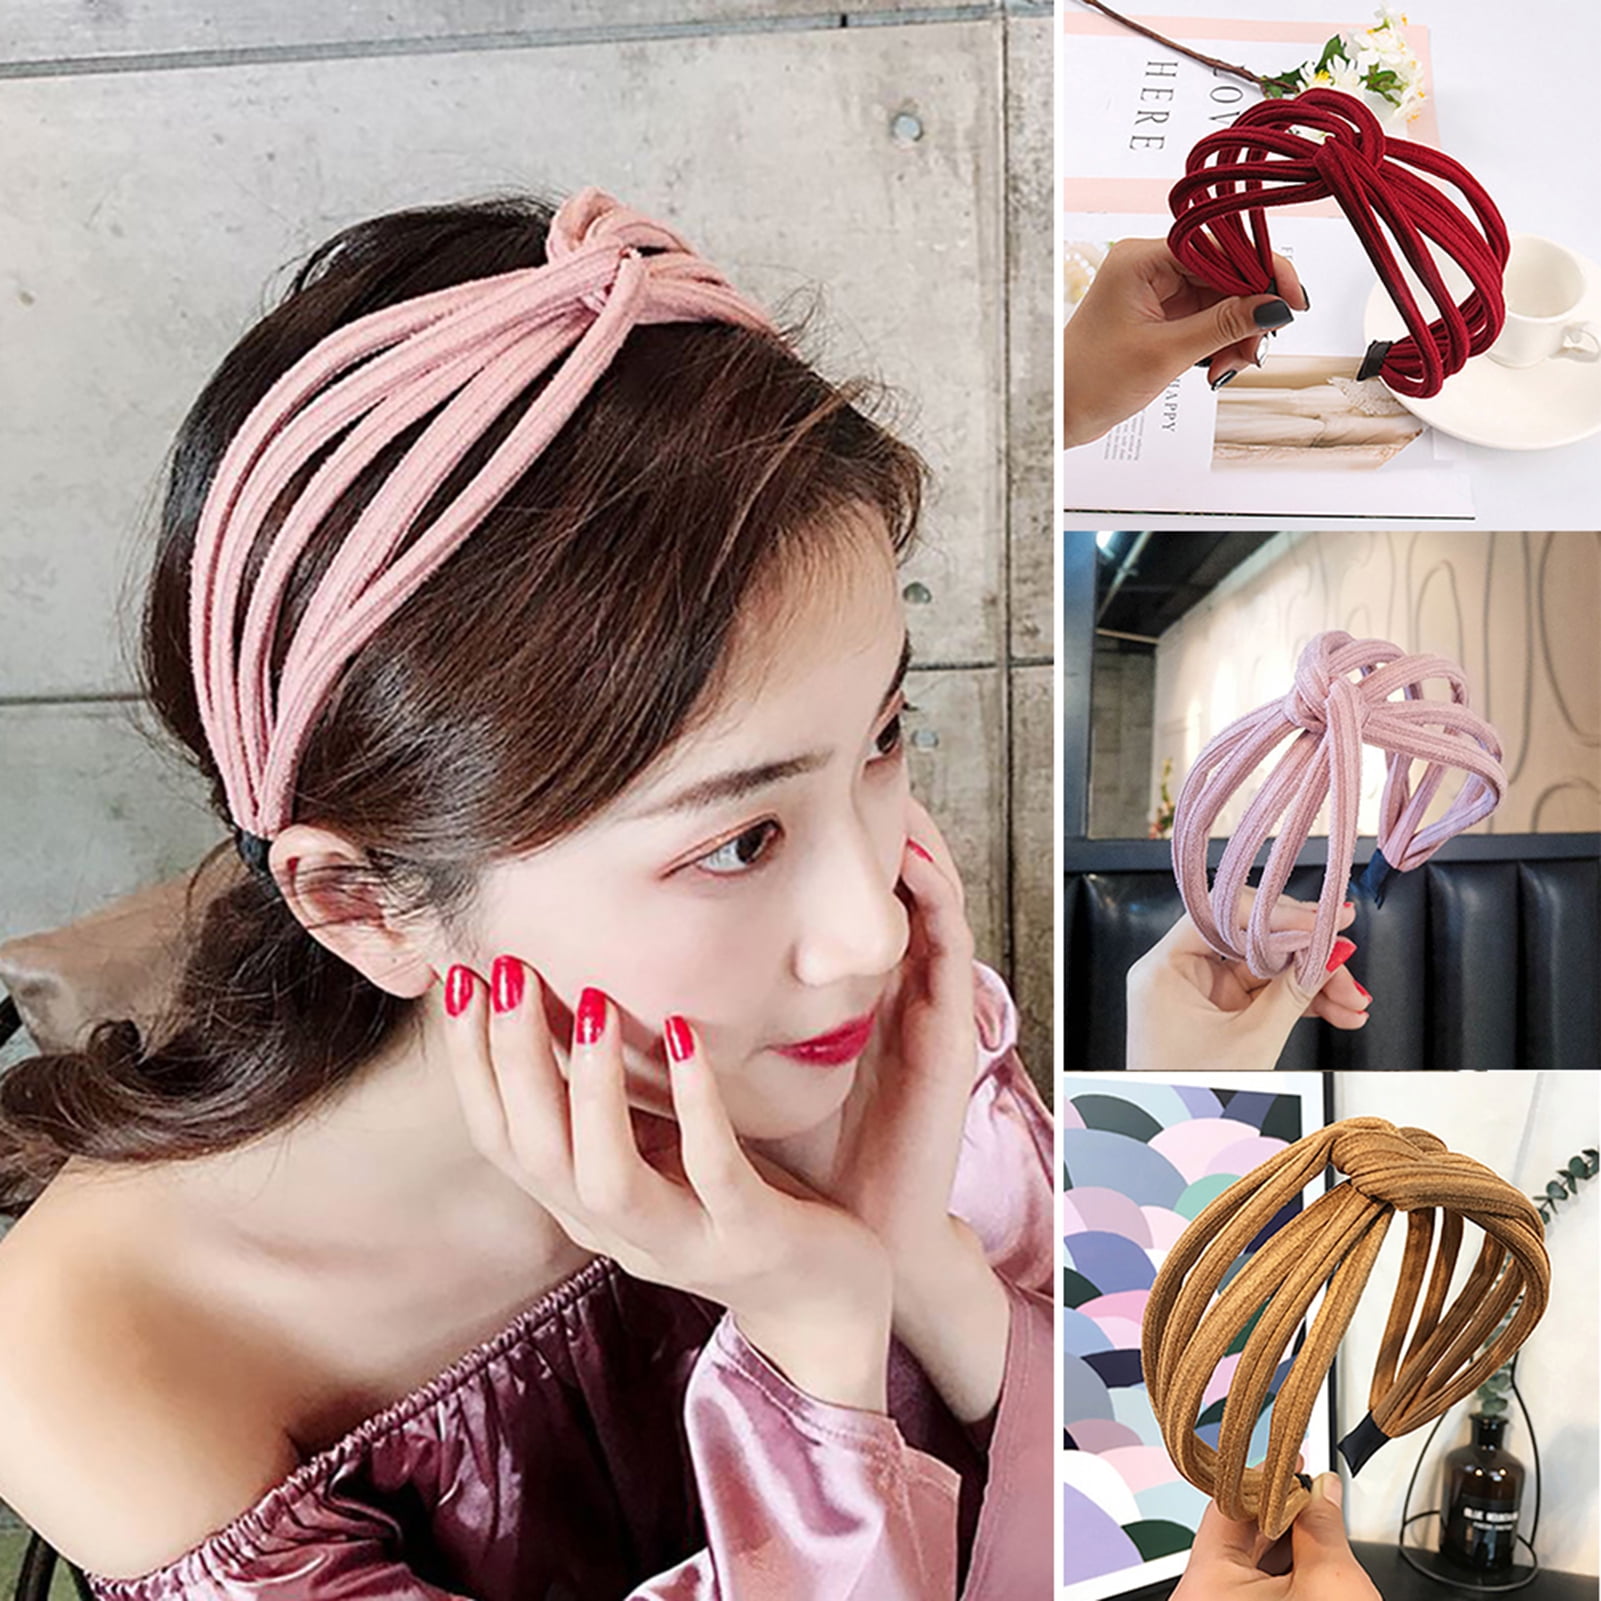 Maxdot 8 Pieces Wide Headbands Knot Turban Headband Hair Band Elastic Hair  Accessories for Women and Girls, 8 Colors : Amazon.in: Beauty